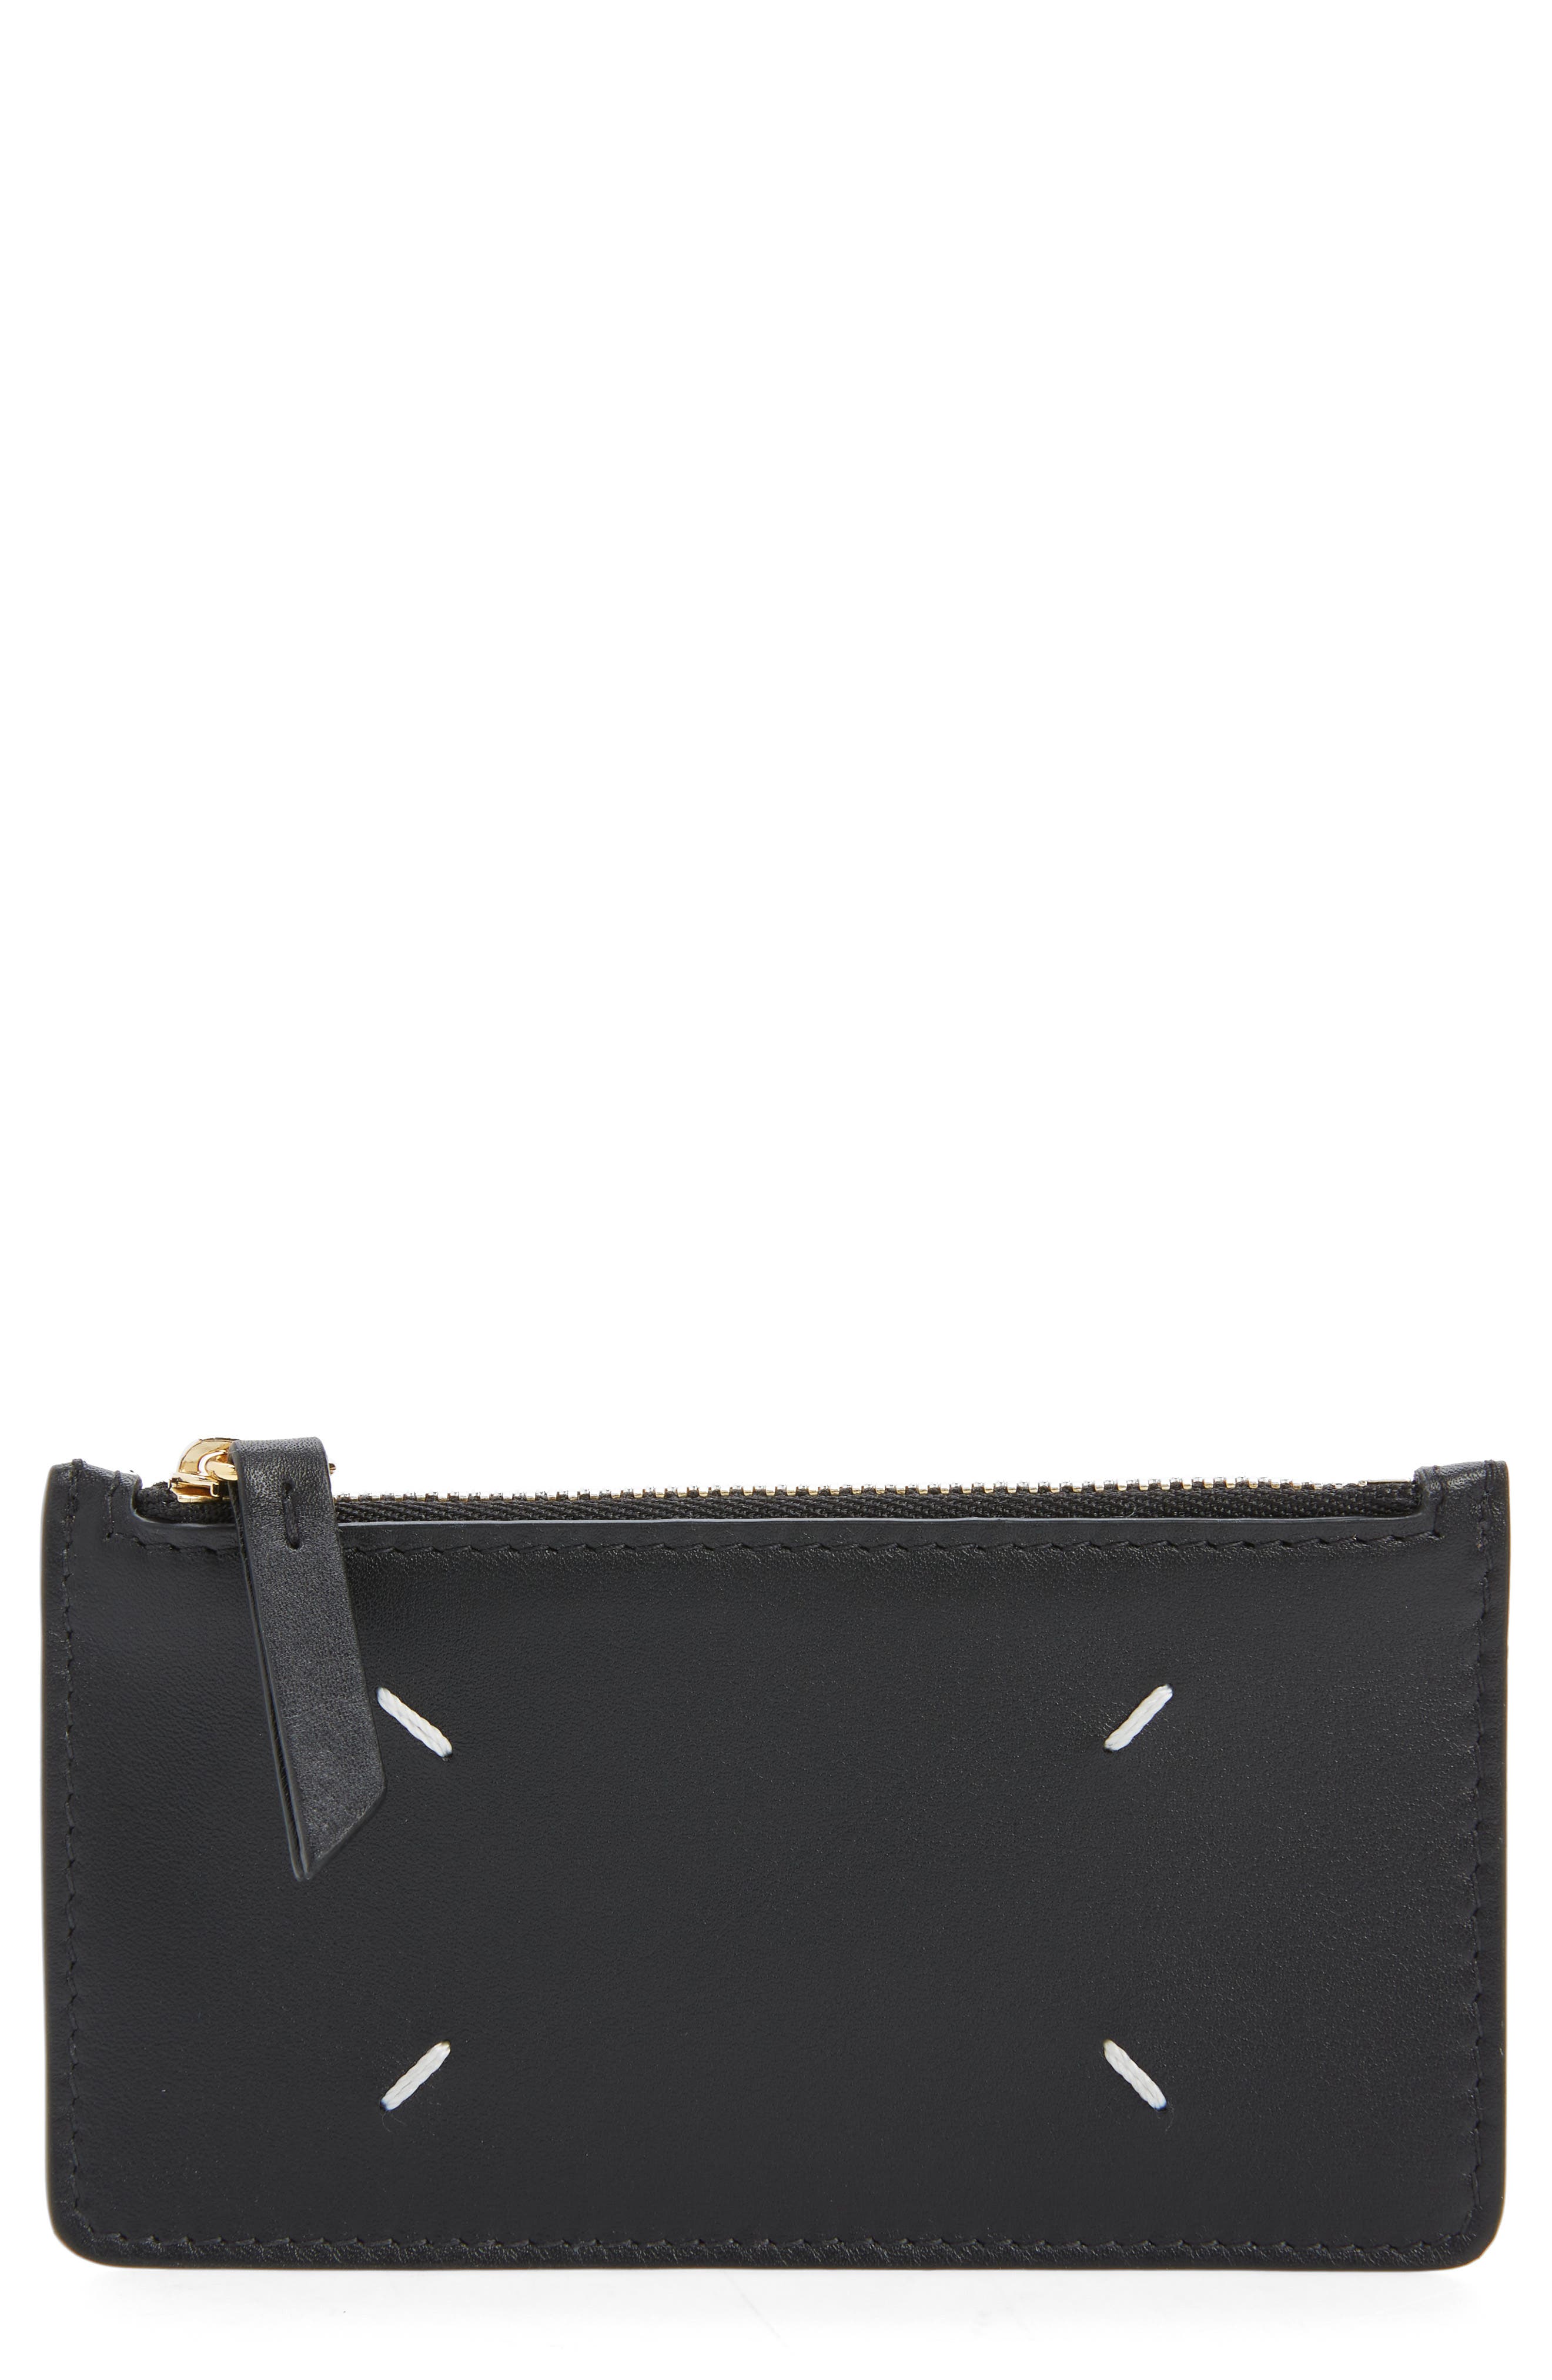 Maison Margiela Black Leather Card Holder for Men Mens Accessories Wallets and cardholders 